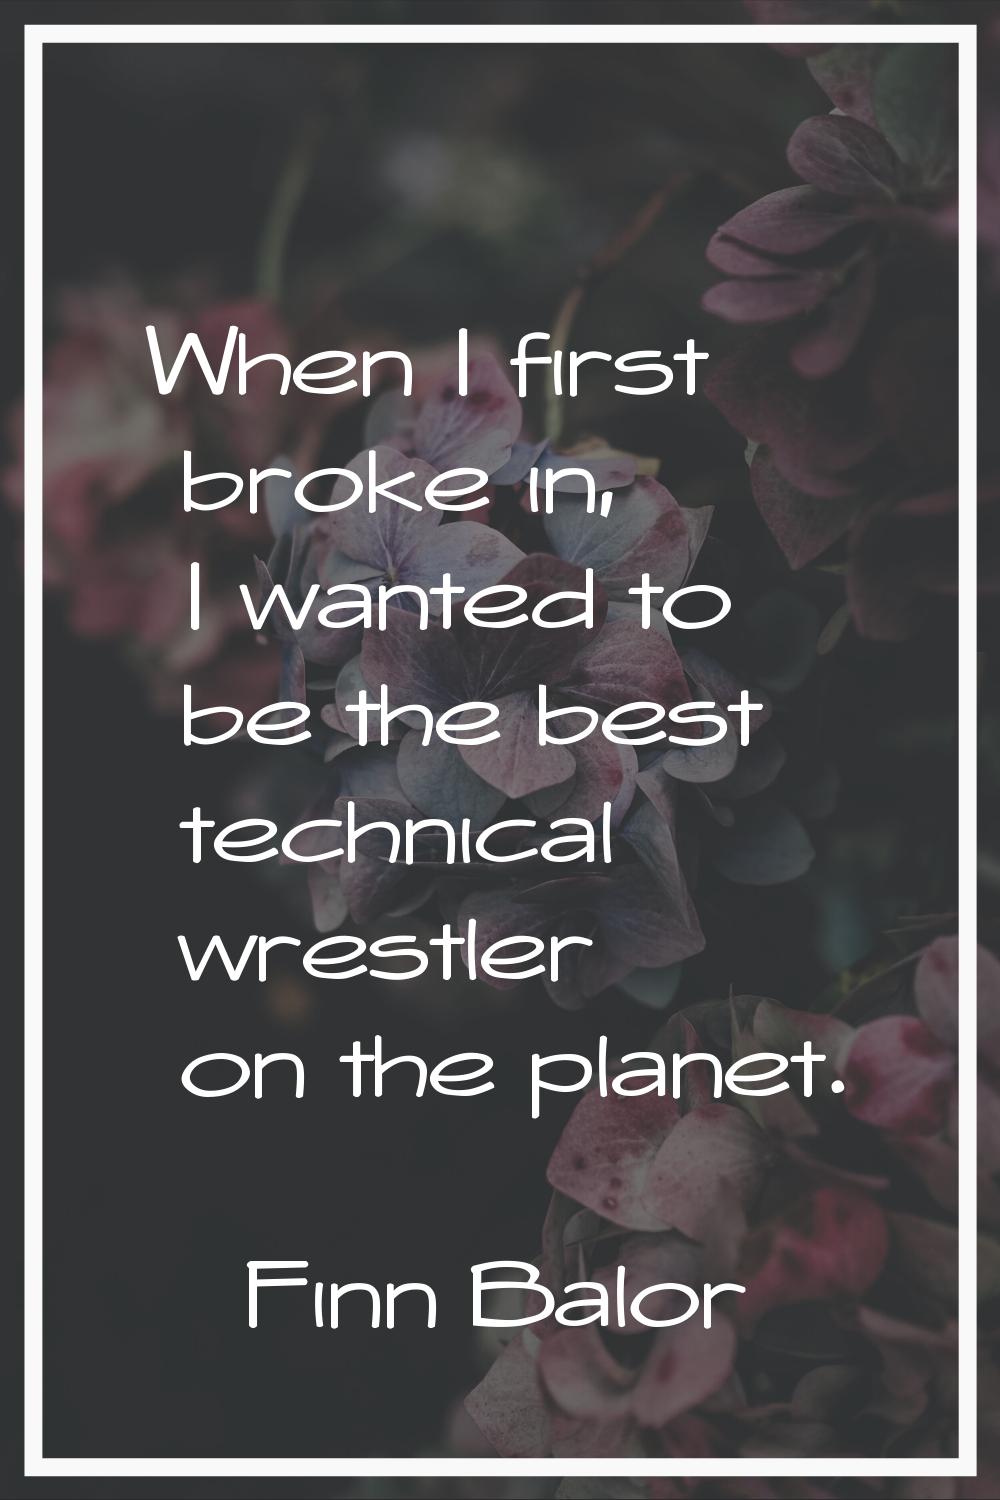 When I first broke in, I wanted to be the best technical wrestler on the planet.